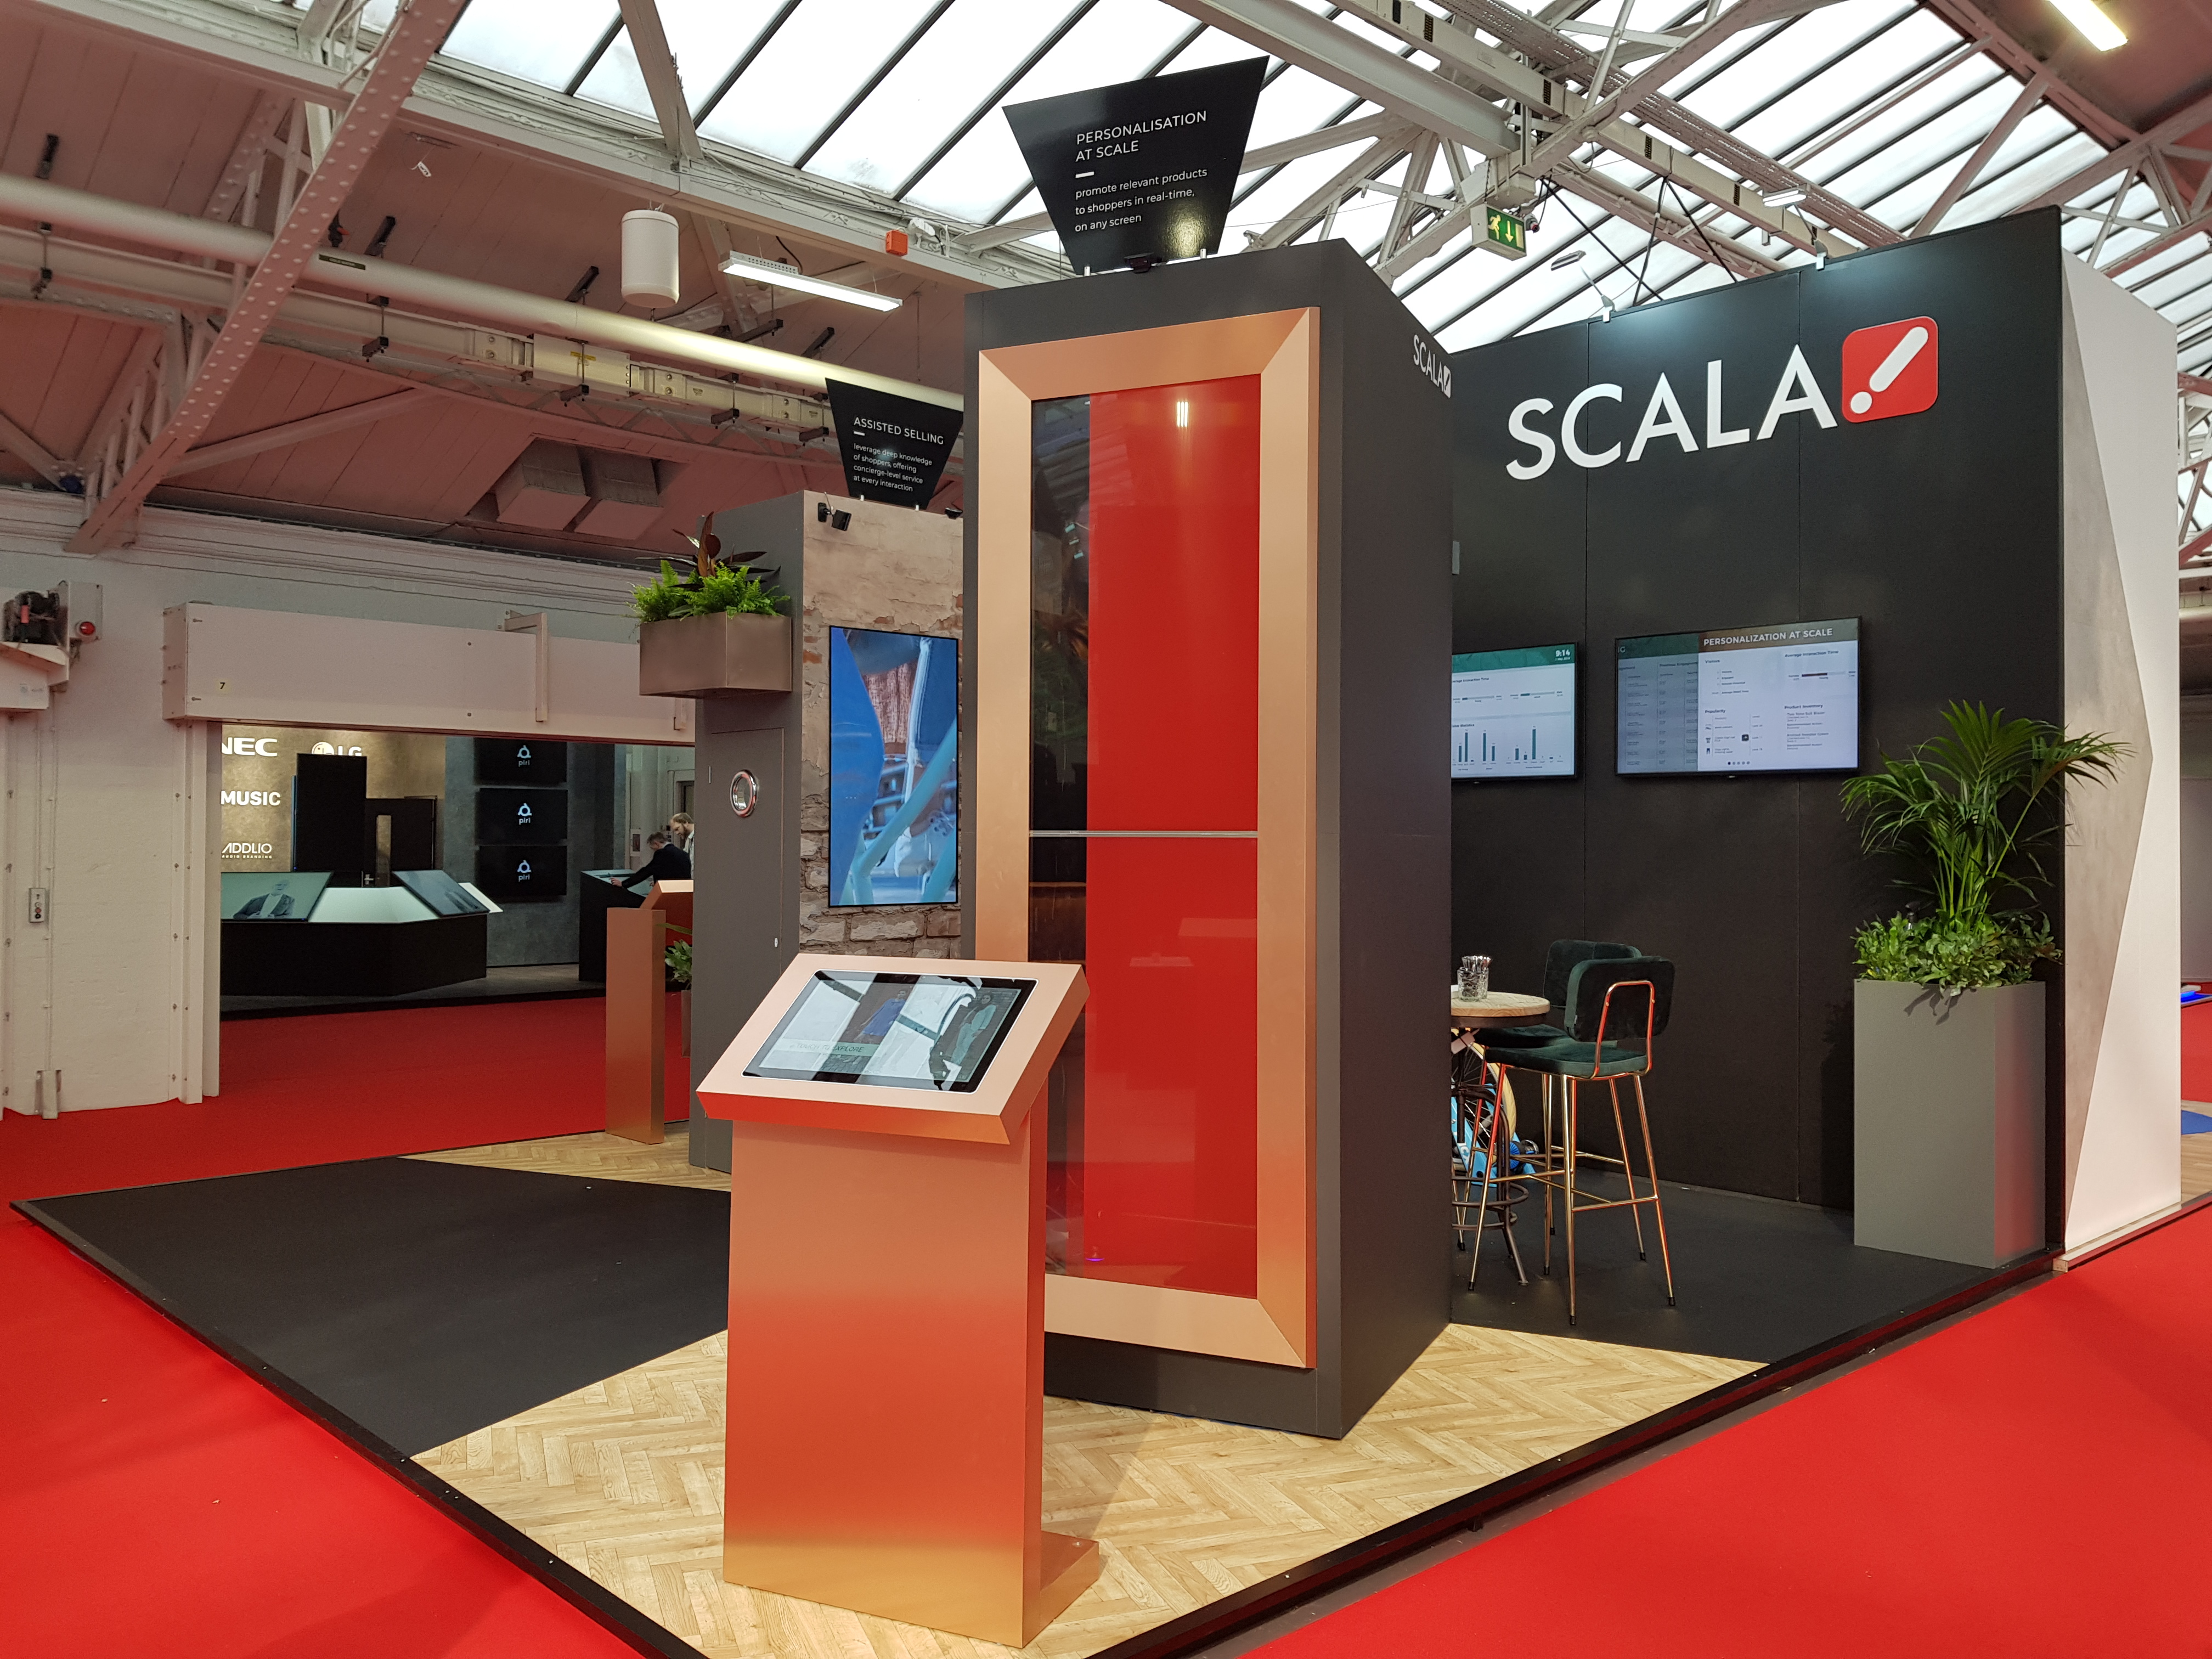 Scala digital signs at the RetailEXPO 2019